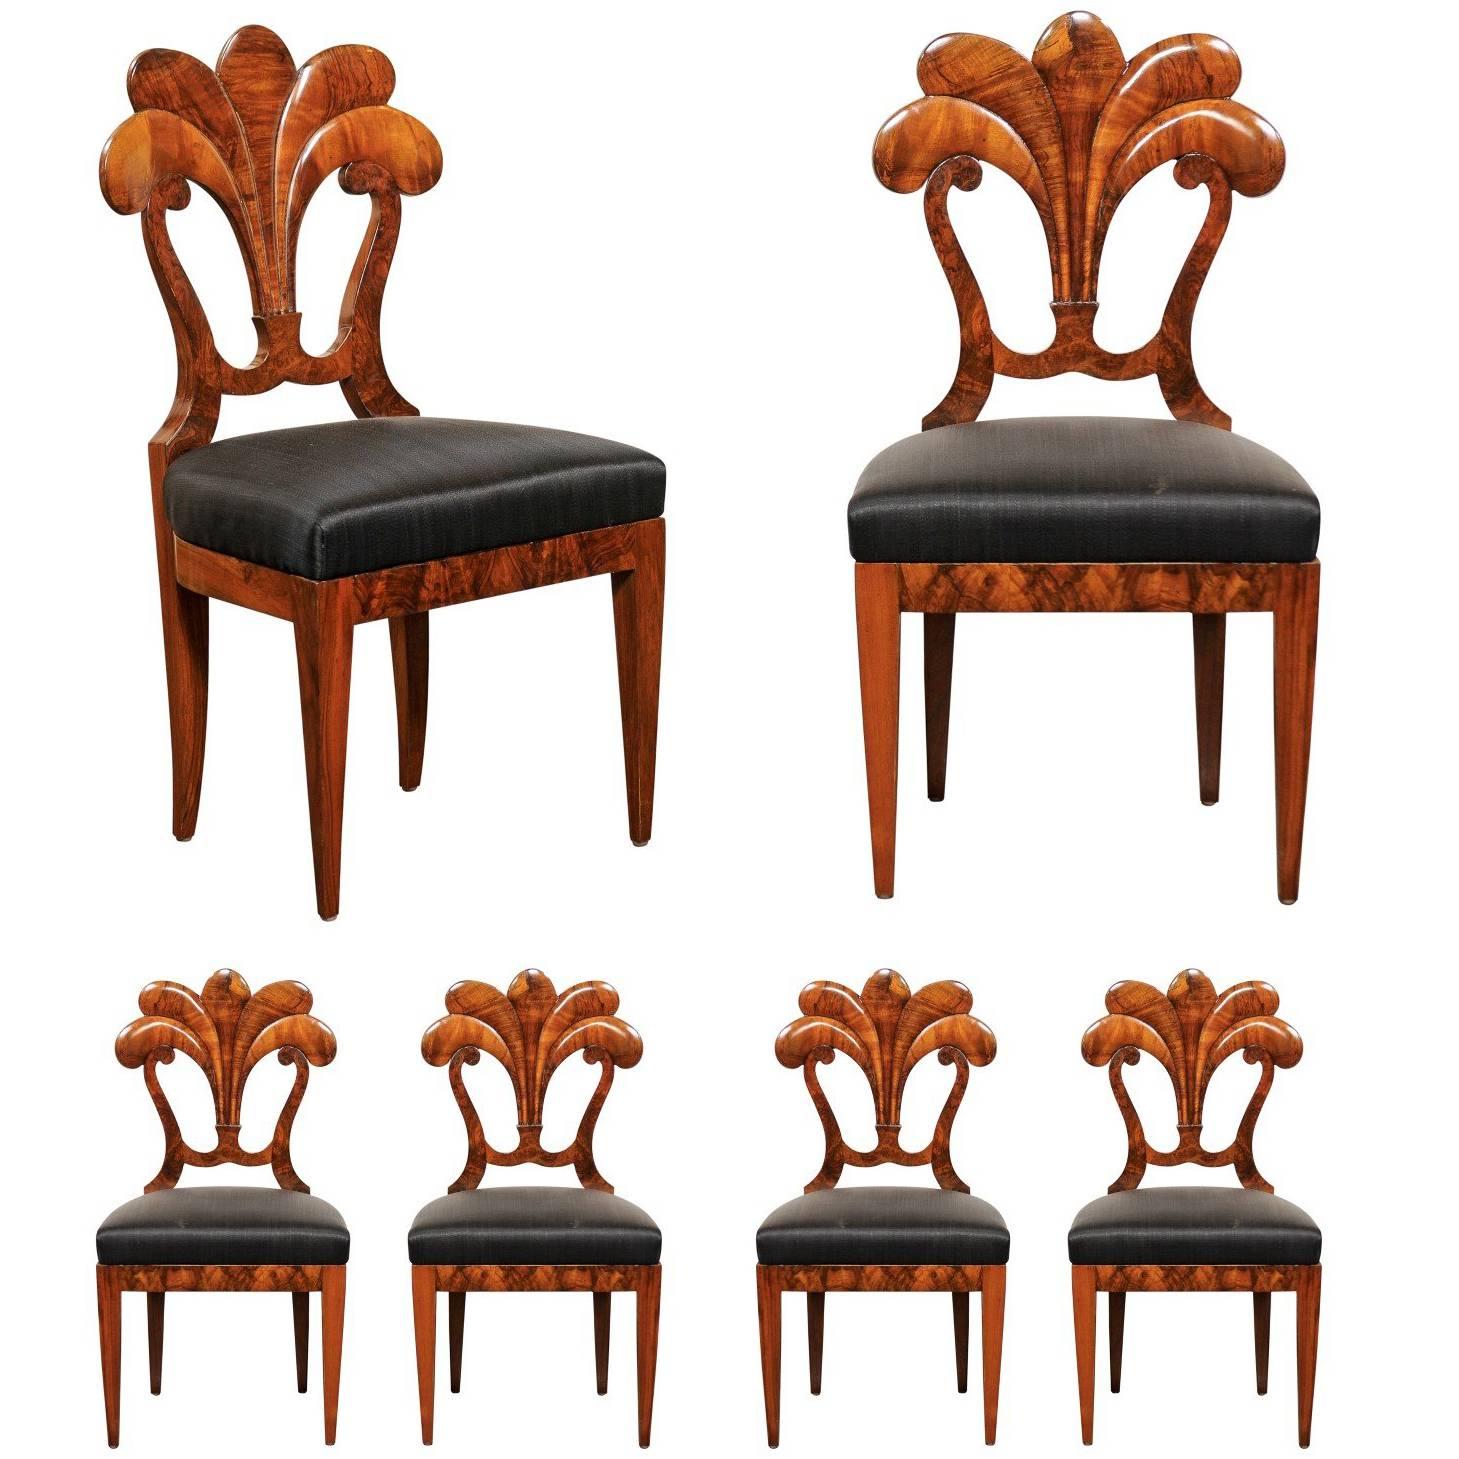 Set of Six Viennese Biedermeier Dining Chairs with Horsehair Seats, circa 1825